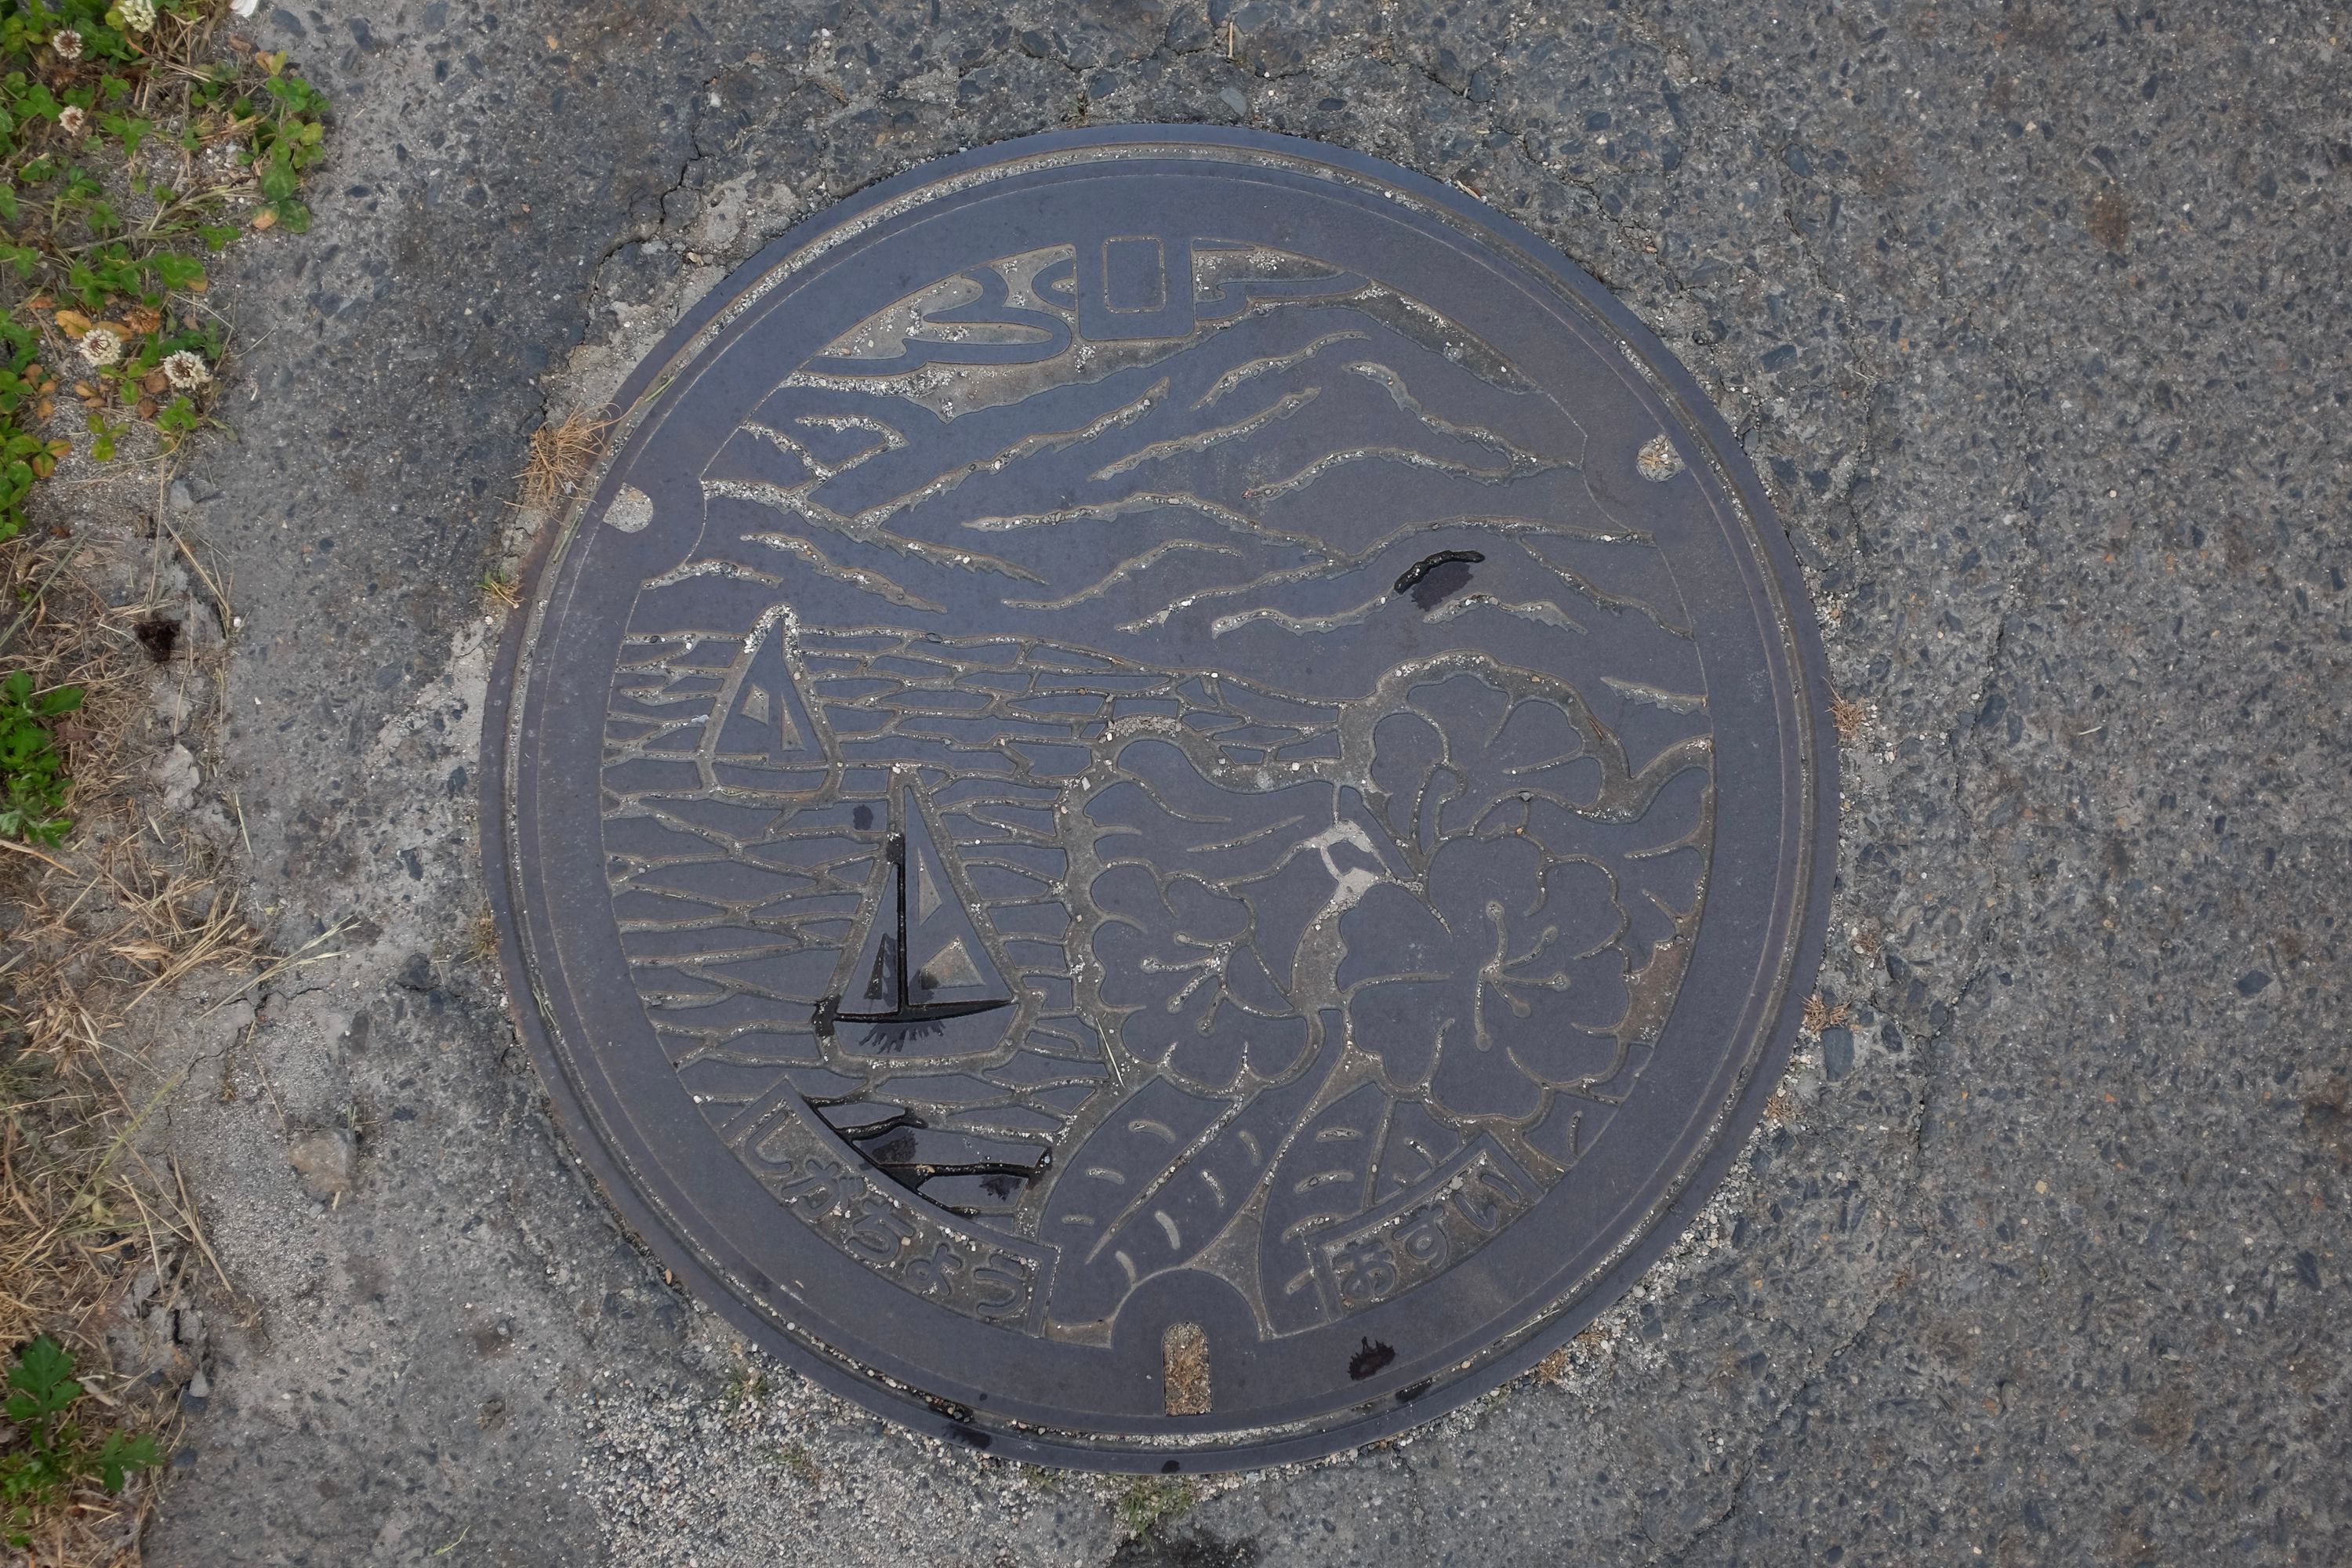 Manhole cover with picture of sailboats on a lake.